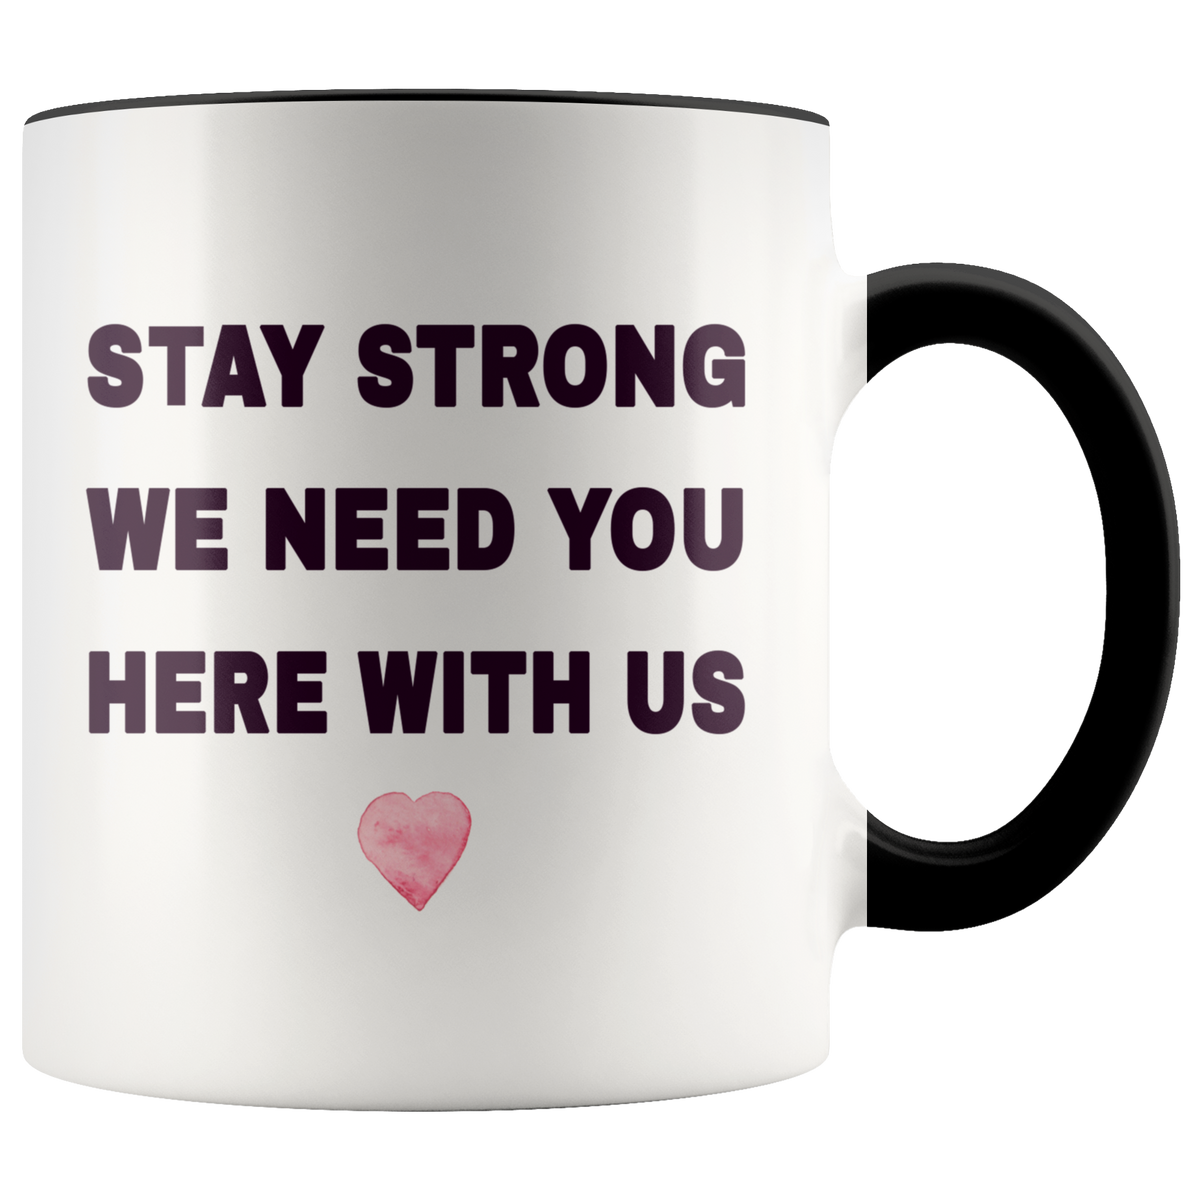 Encouragement Motivational Survival Gift - Stay Strong We Need You Here With Us Accent Coffee Mug 11oz